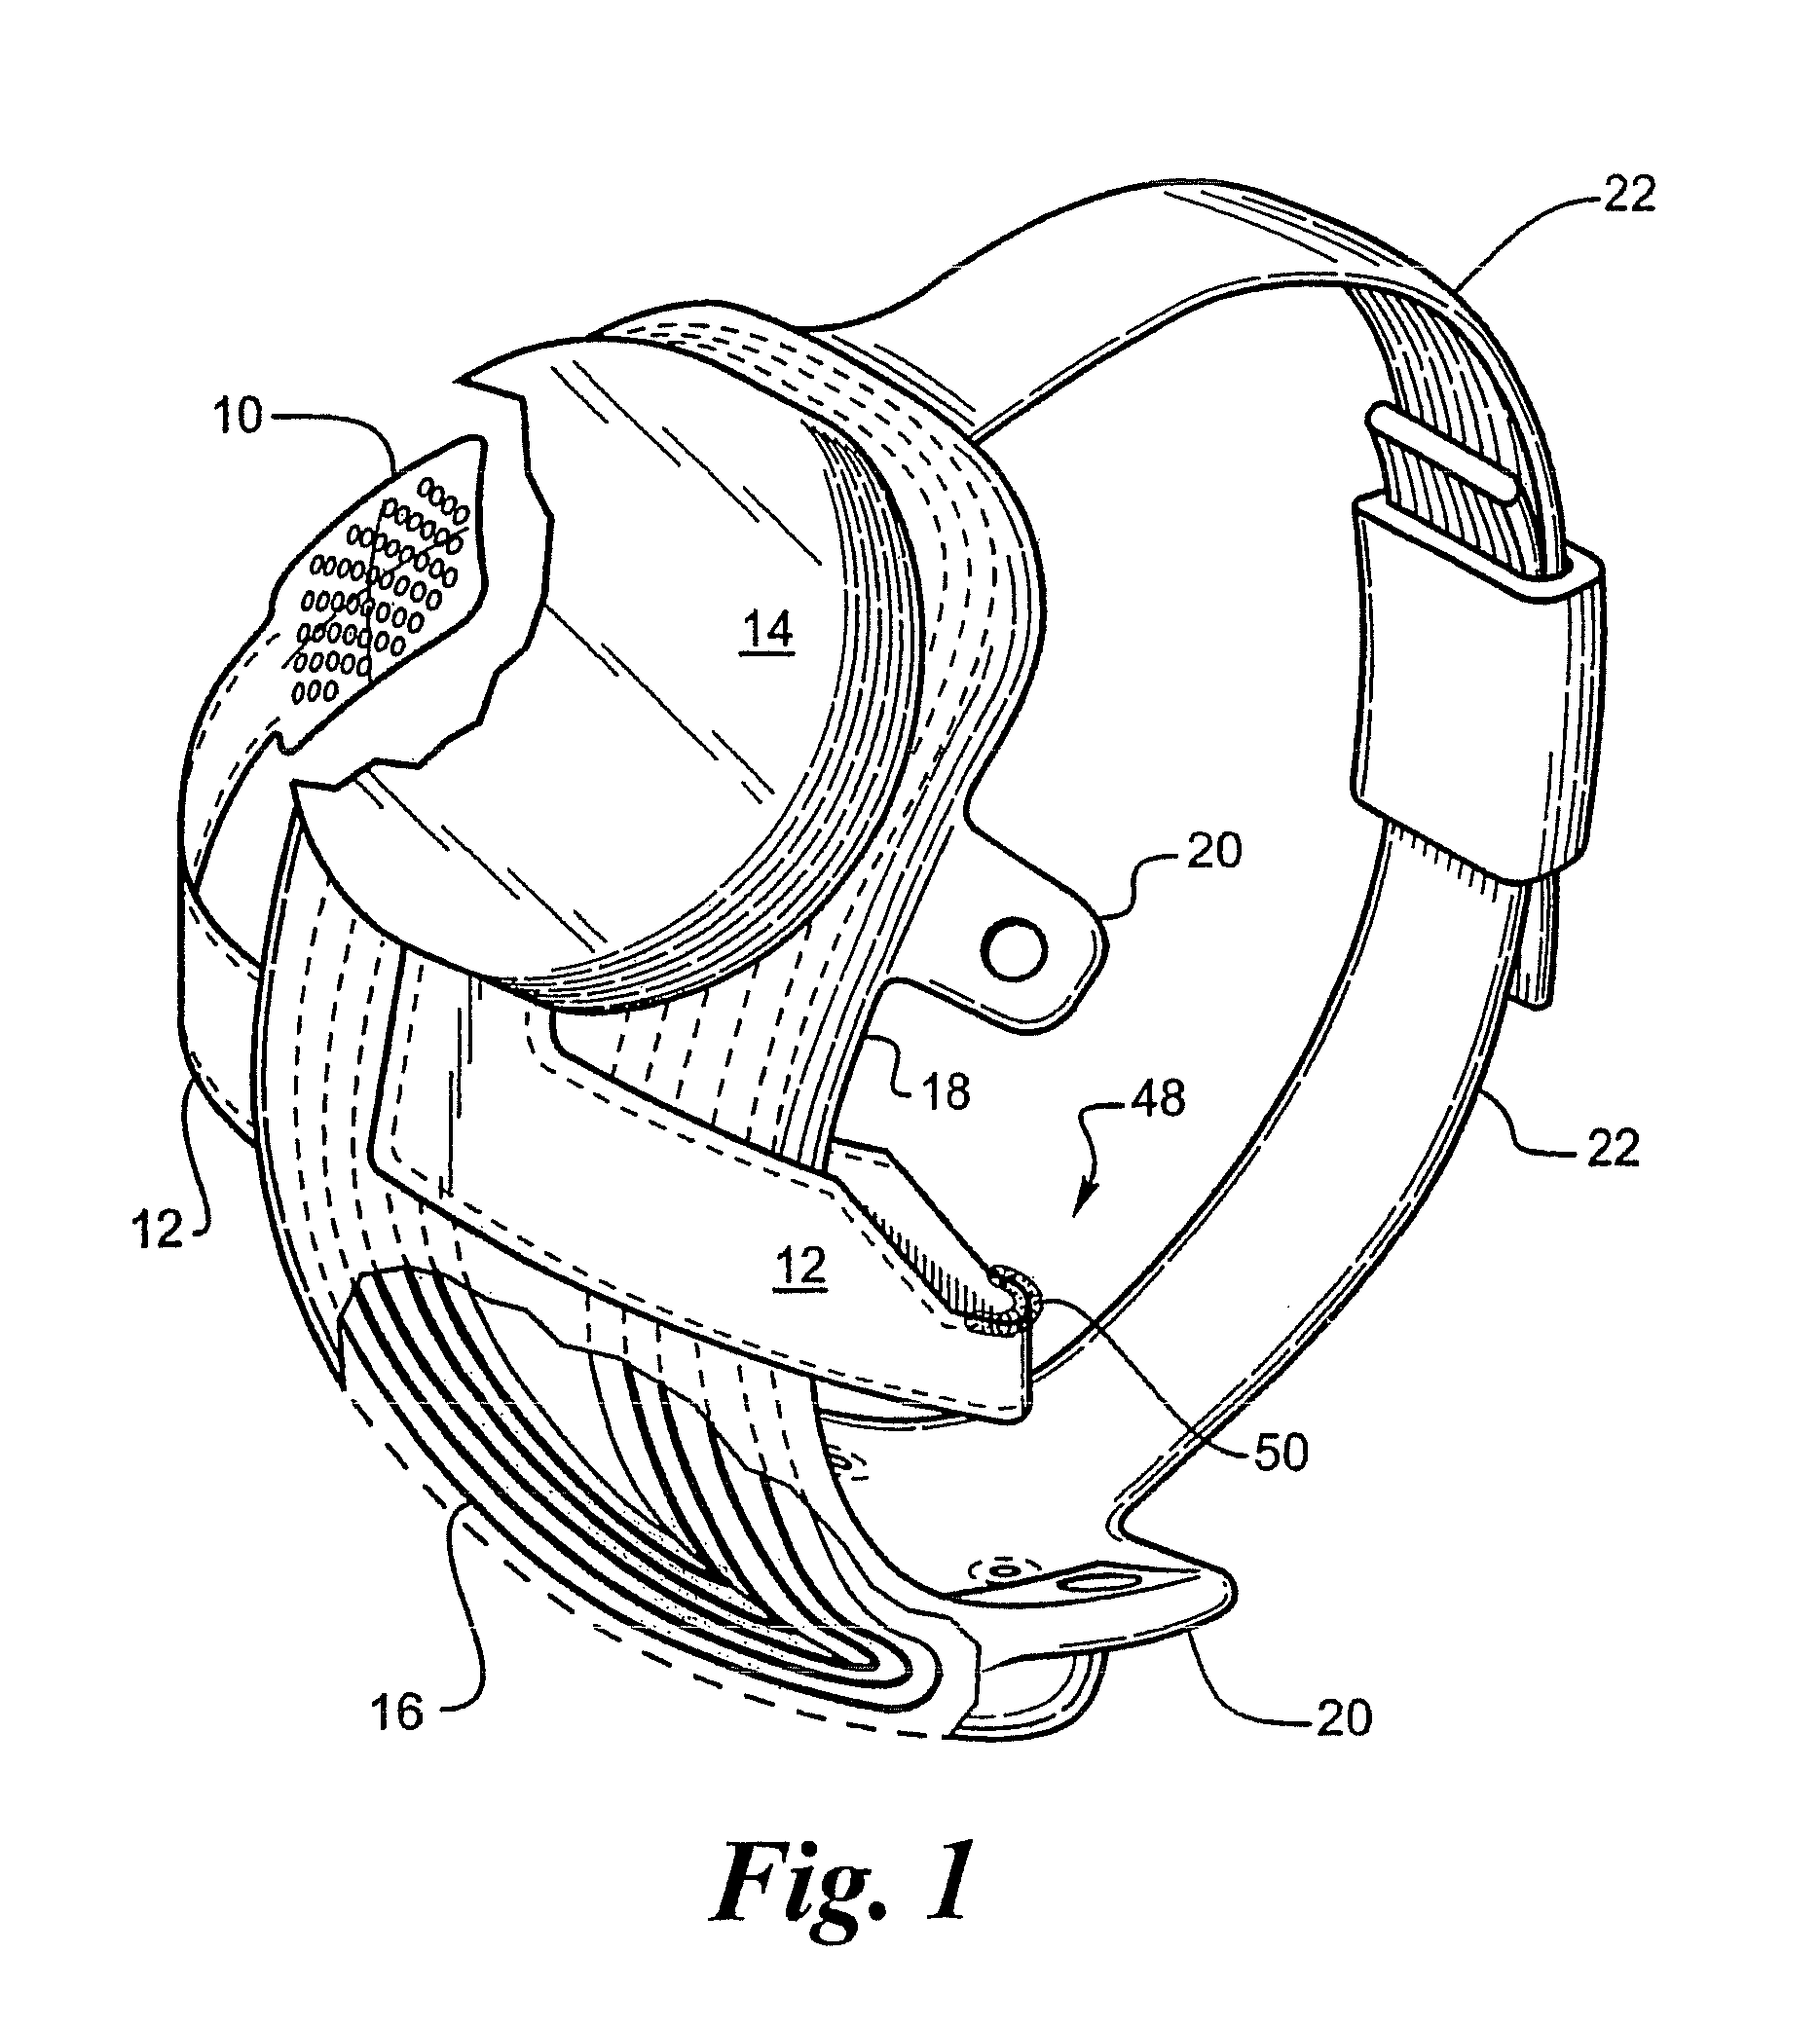 Method of manufacturing a flexible circuit electrode array